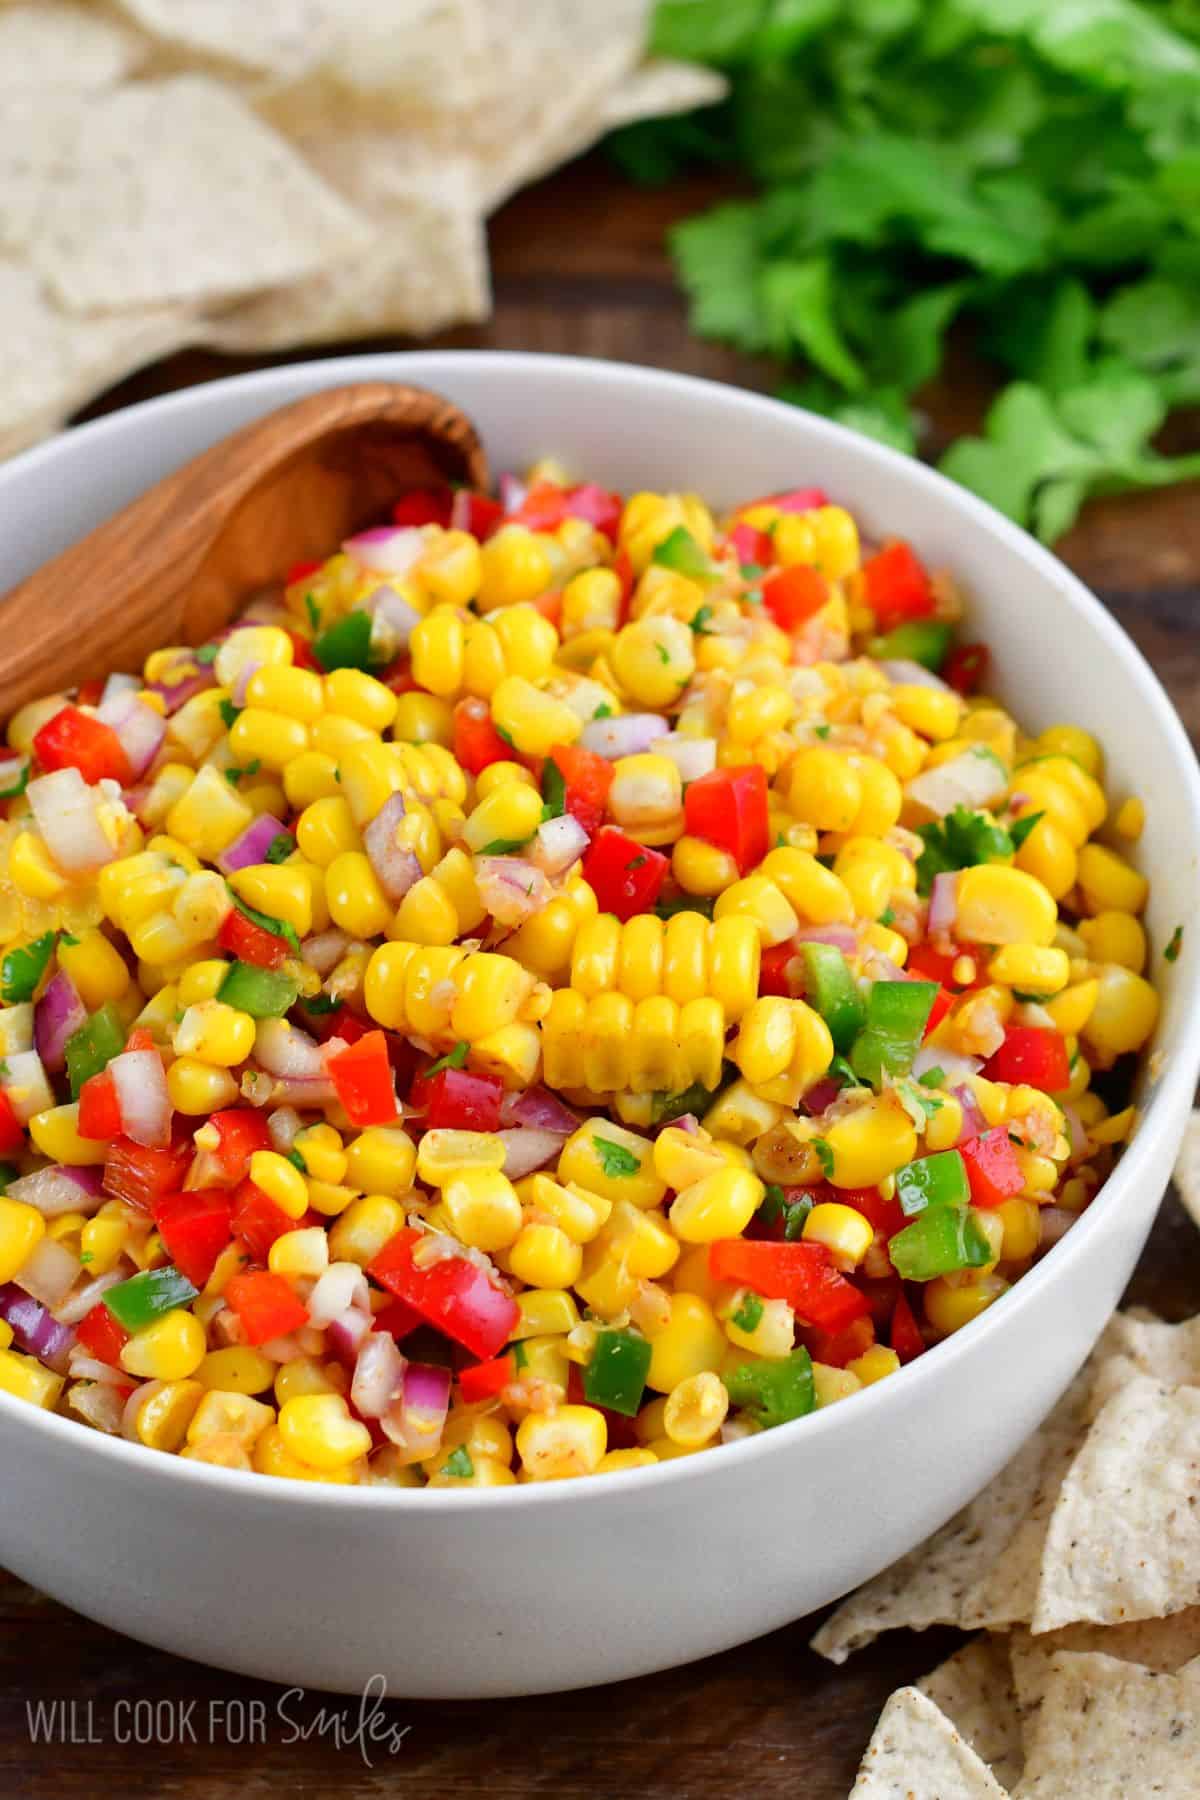 Corn salsa in a white bowl with a wooden spoon sitting in the bowl.